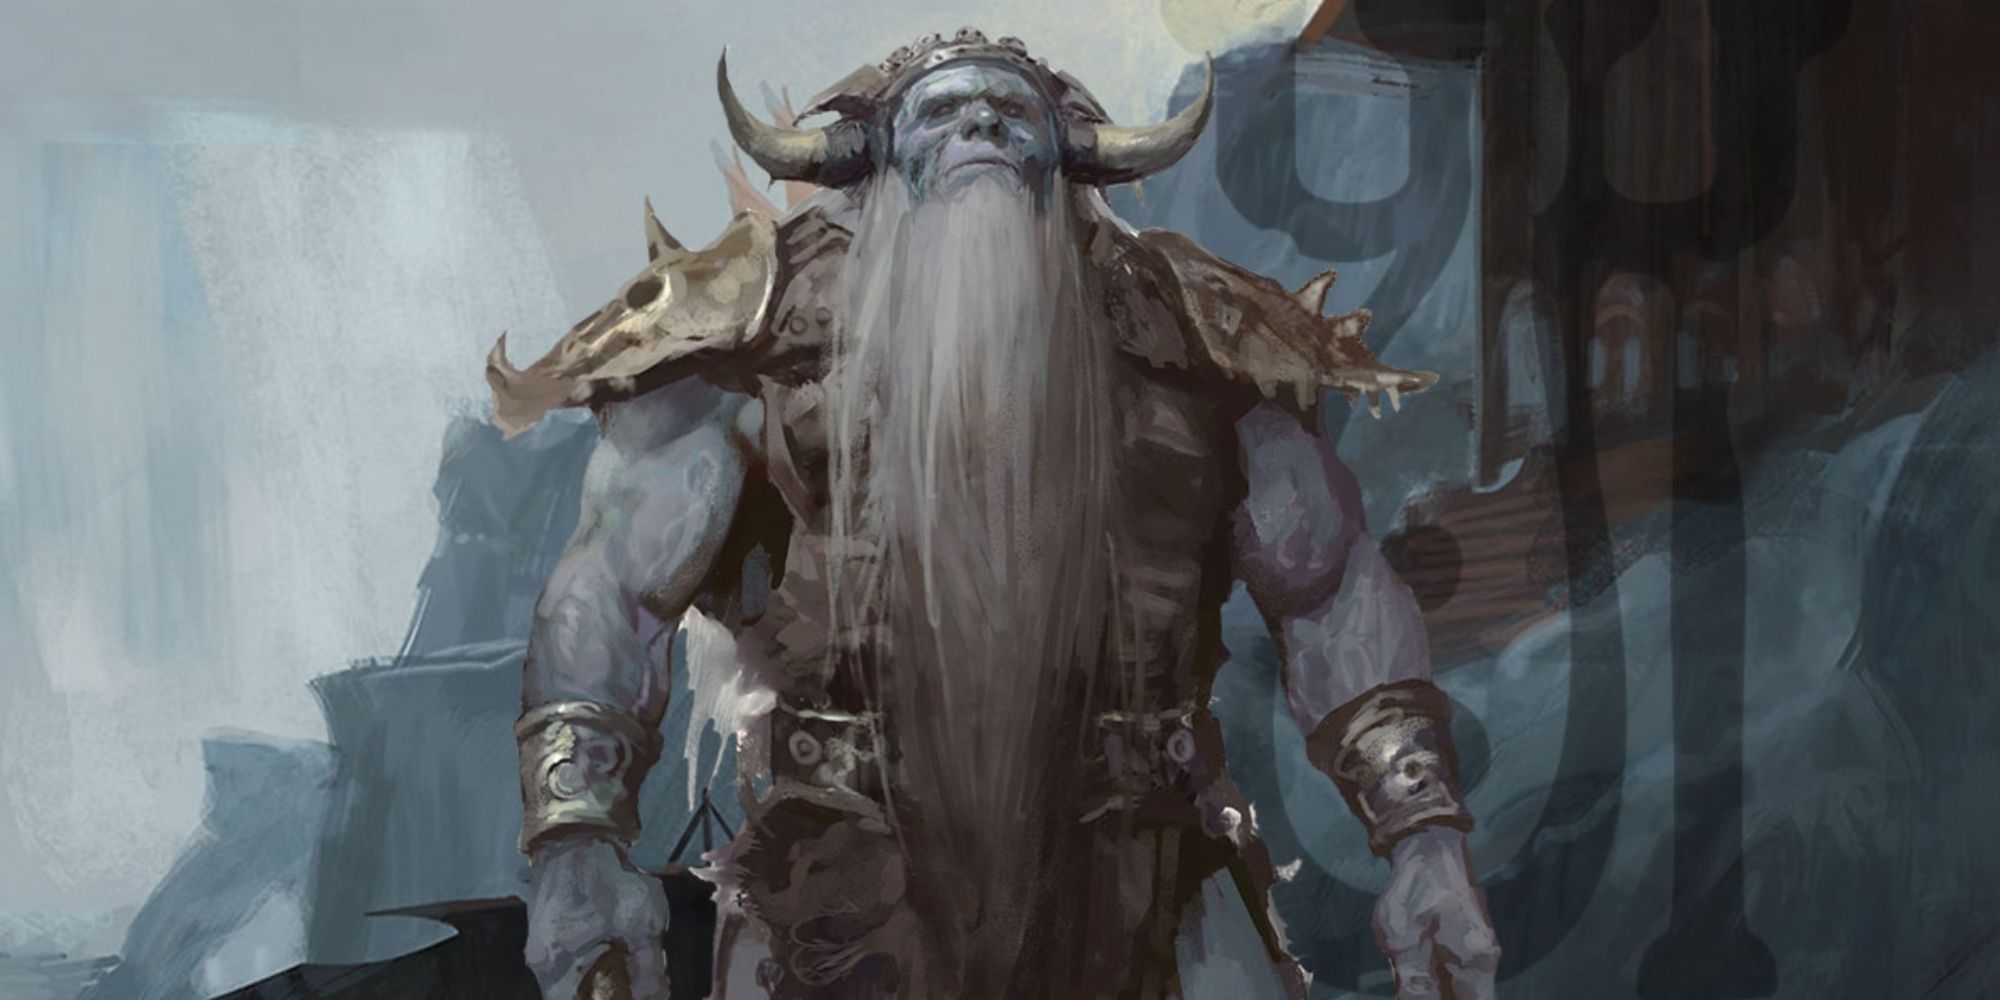 Dungeons & Dragons artwork showing a frost giant with a long, white beard standing in a frozen environment.